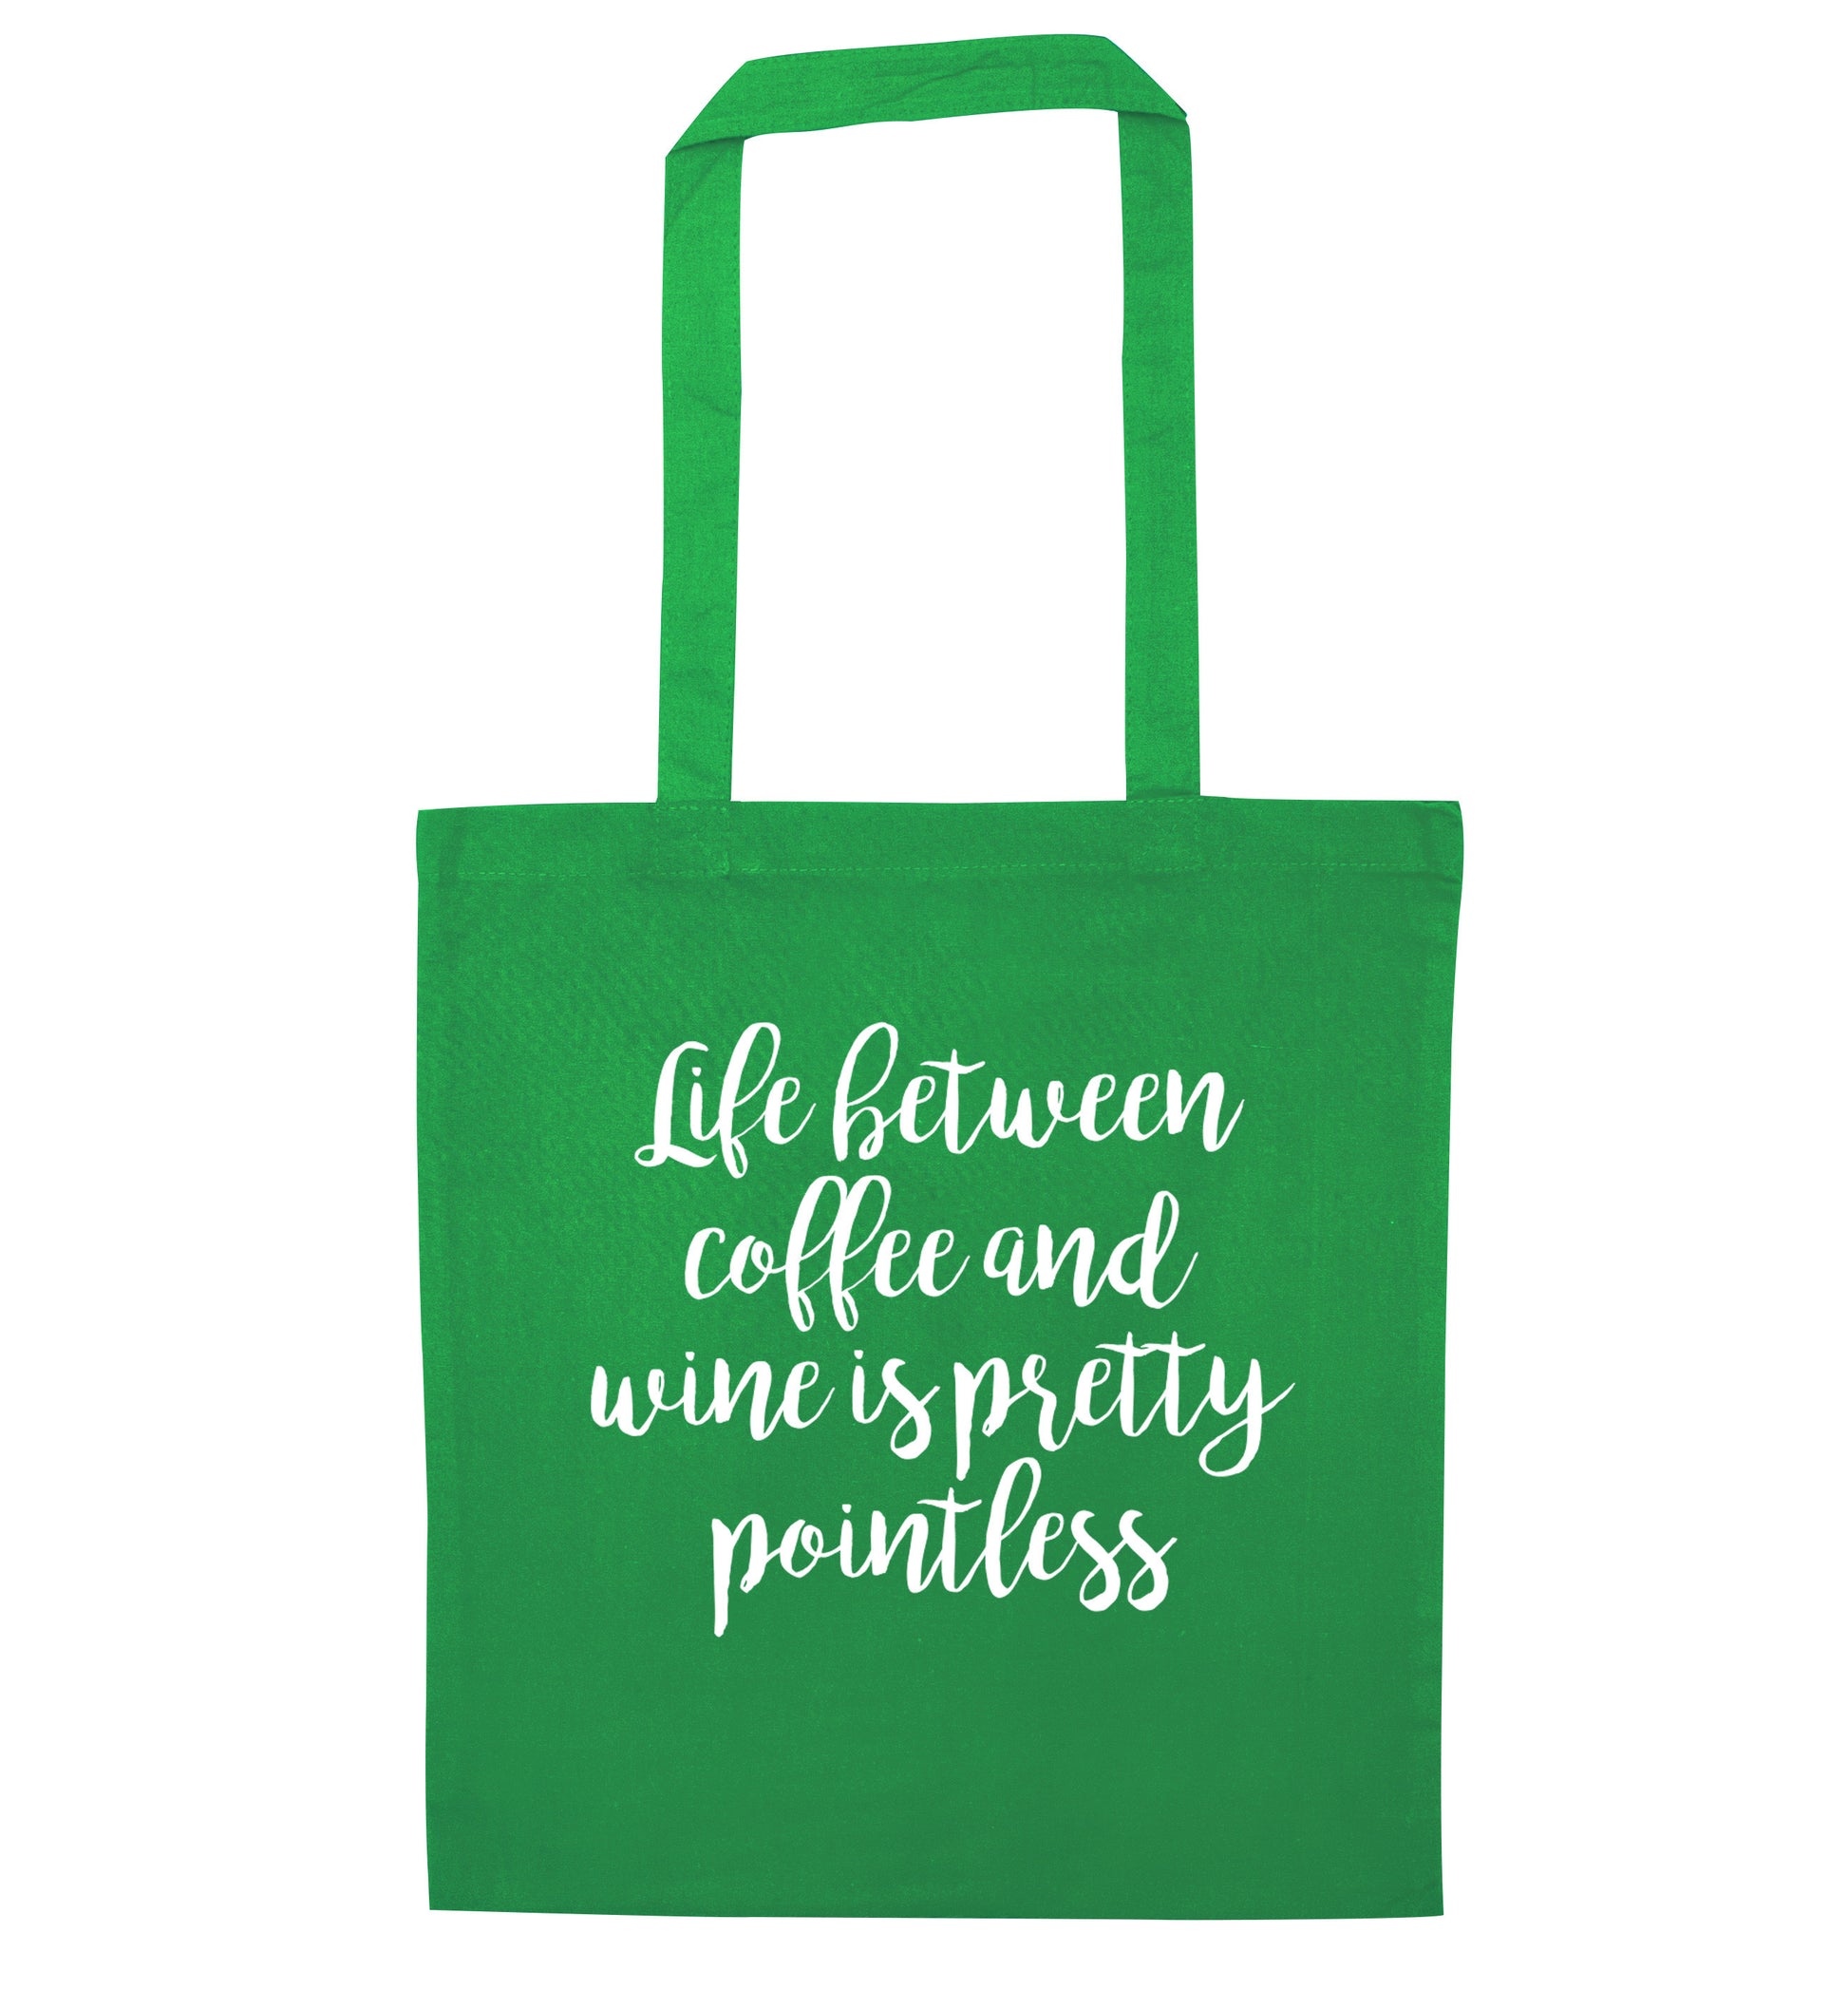 Life between coffee and wine is pretty pointless green tote bag